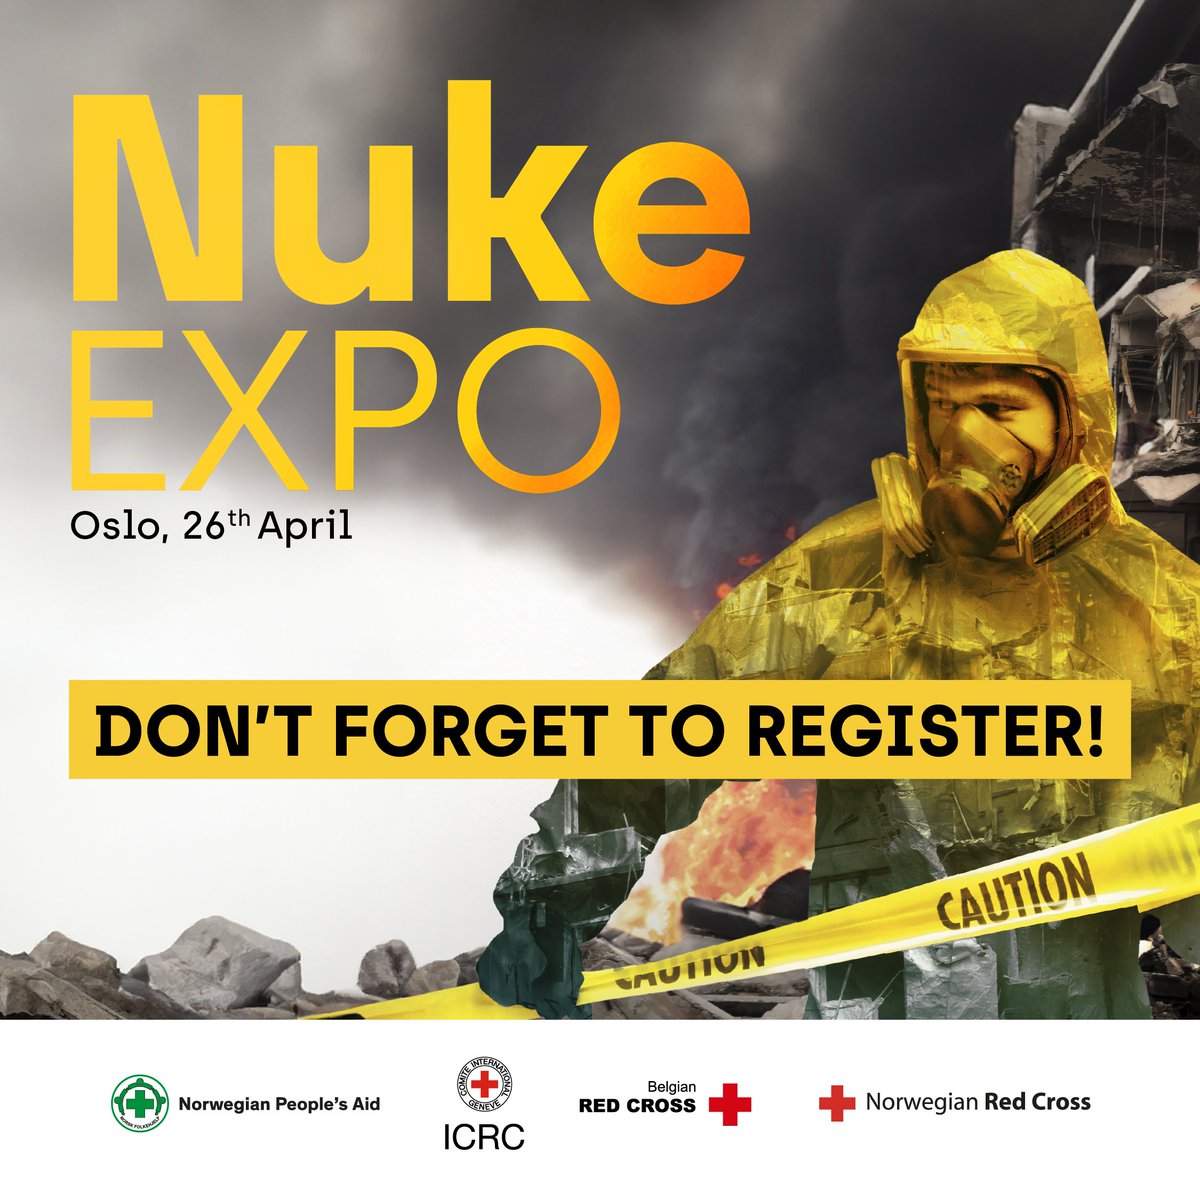 Friday is the day! Top-notch experts, a brilliant exposition and insightful conversations. #NukeEXPO has it all 🤩 It can be easy to forget to register when the excitement takes over. Don't worry, we got you covered! This link will get you there: nukeexpo.org/event-details/…